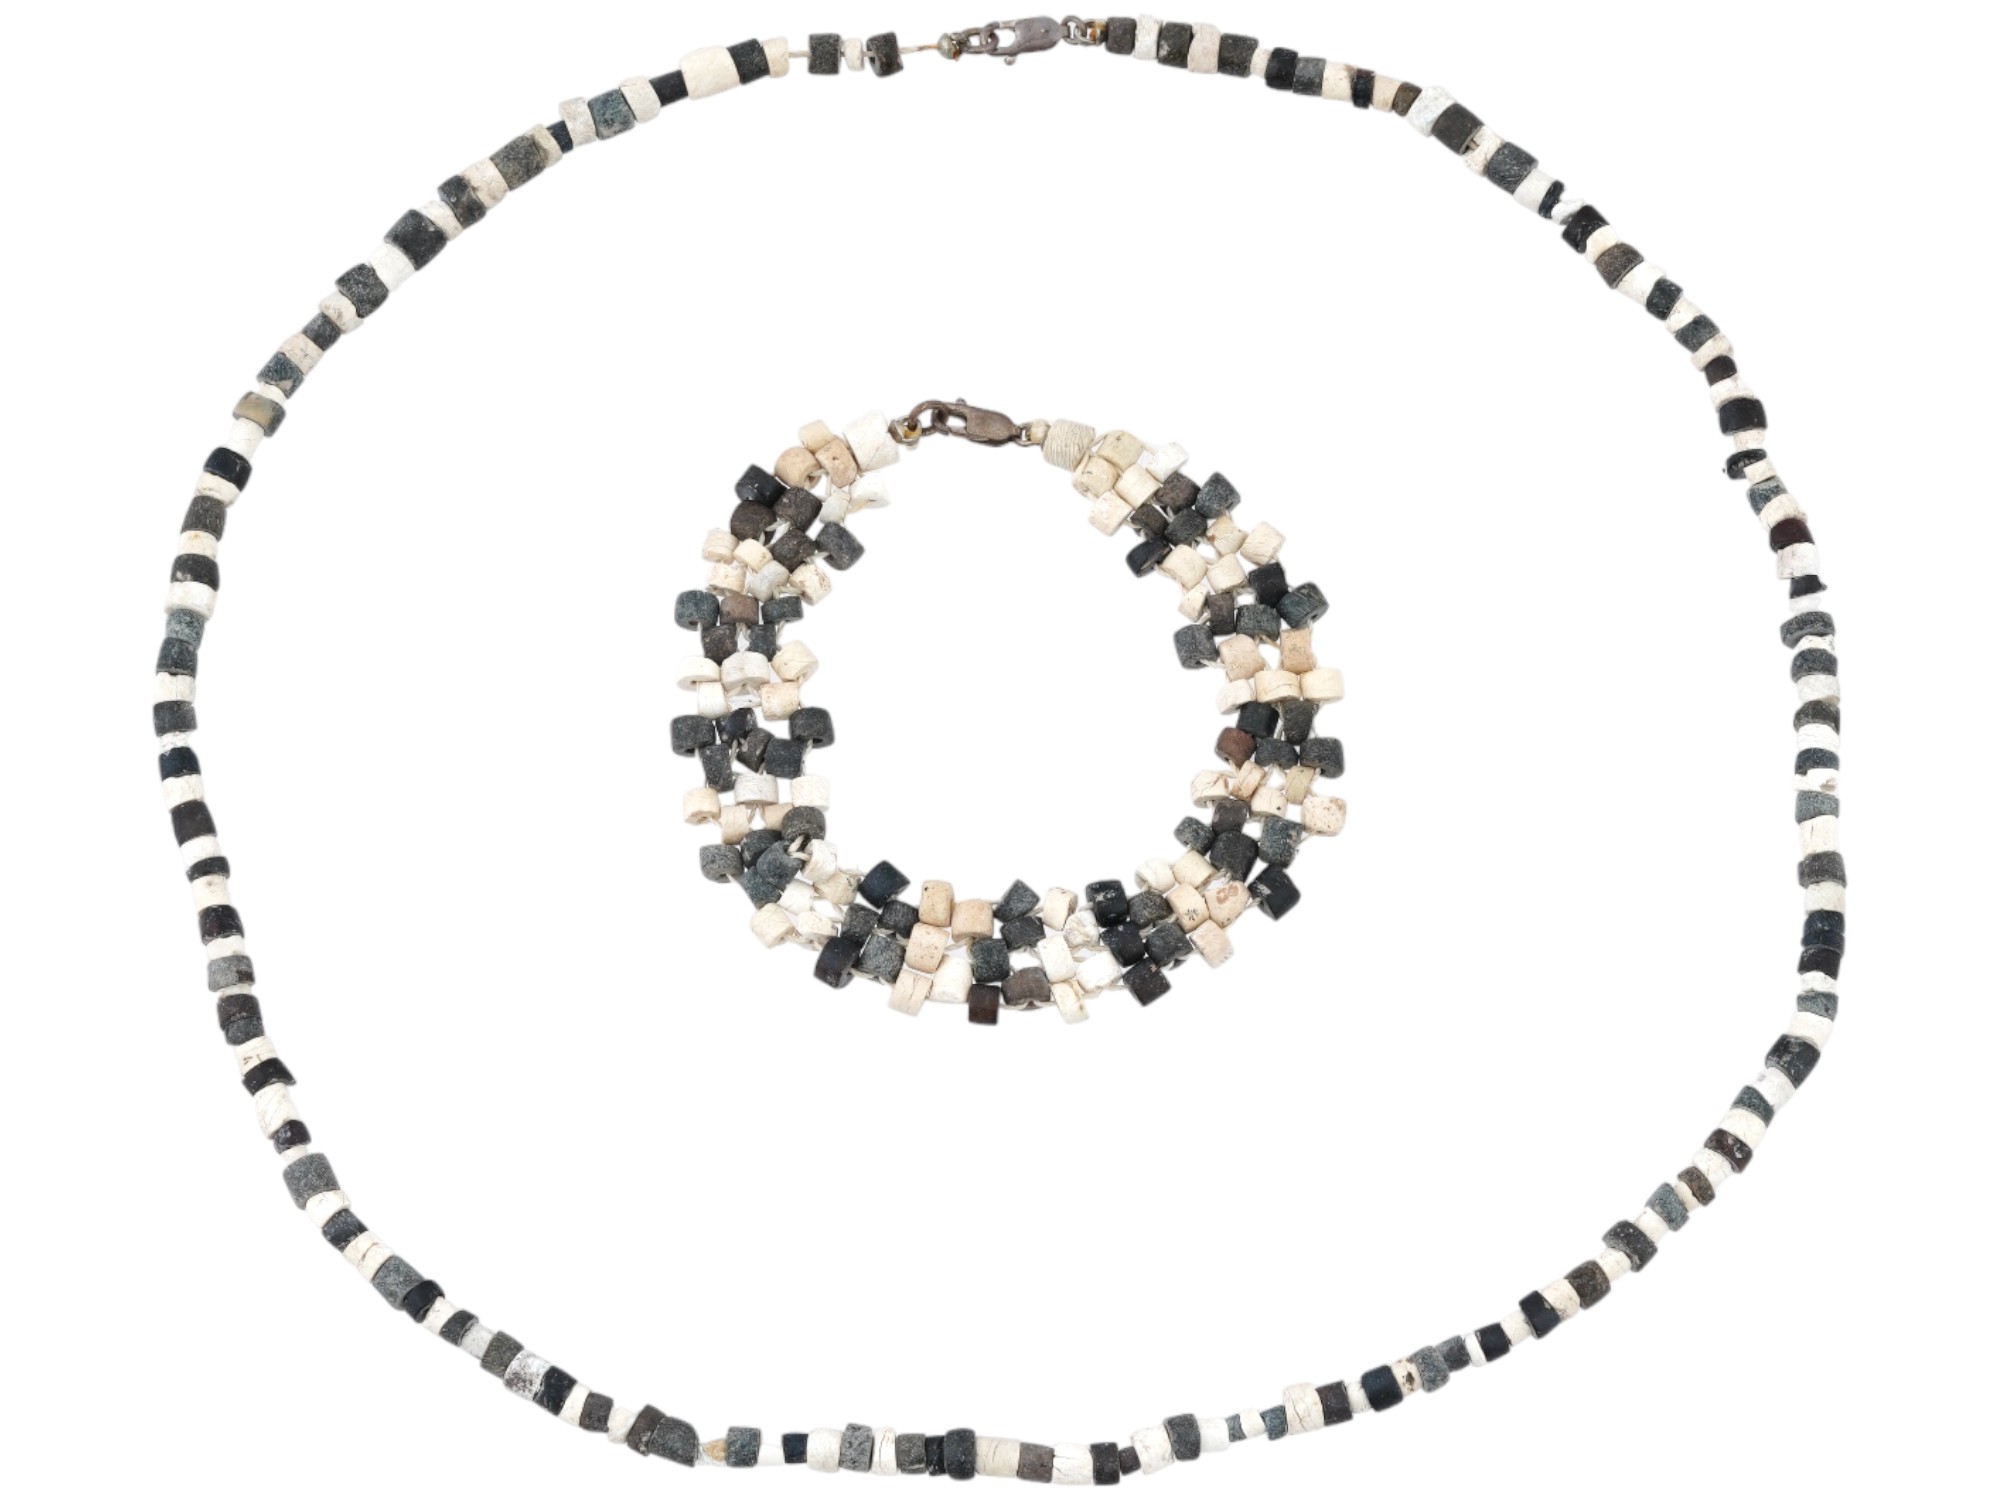 ANCIENT BLACK WHITE STONE BEAD NECKLACE AND BRACELET PIC-1